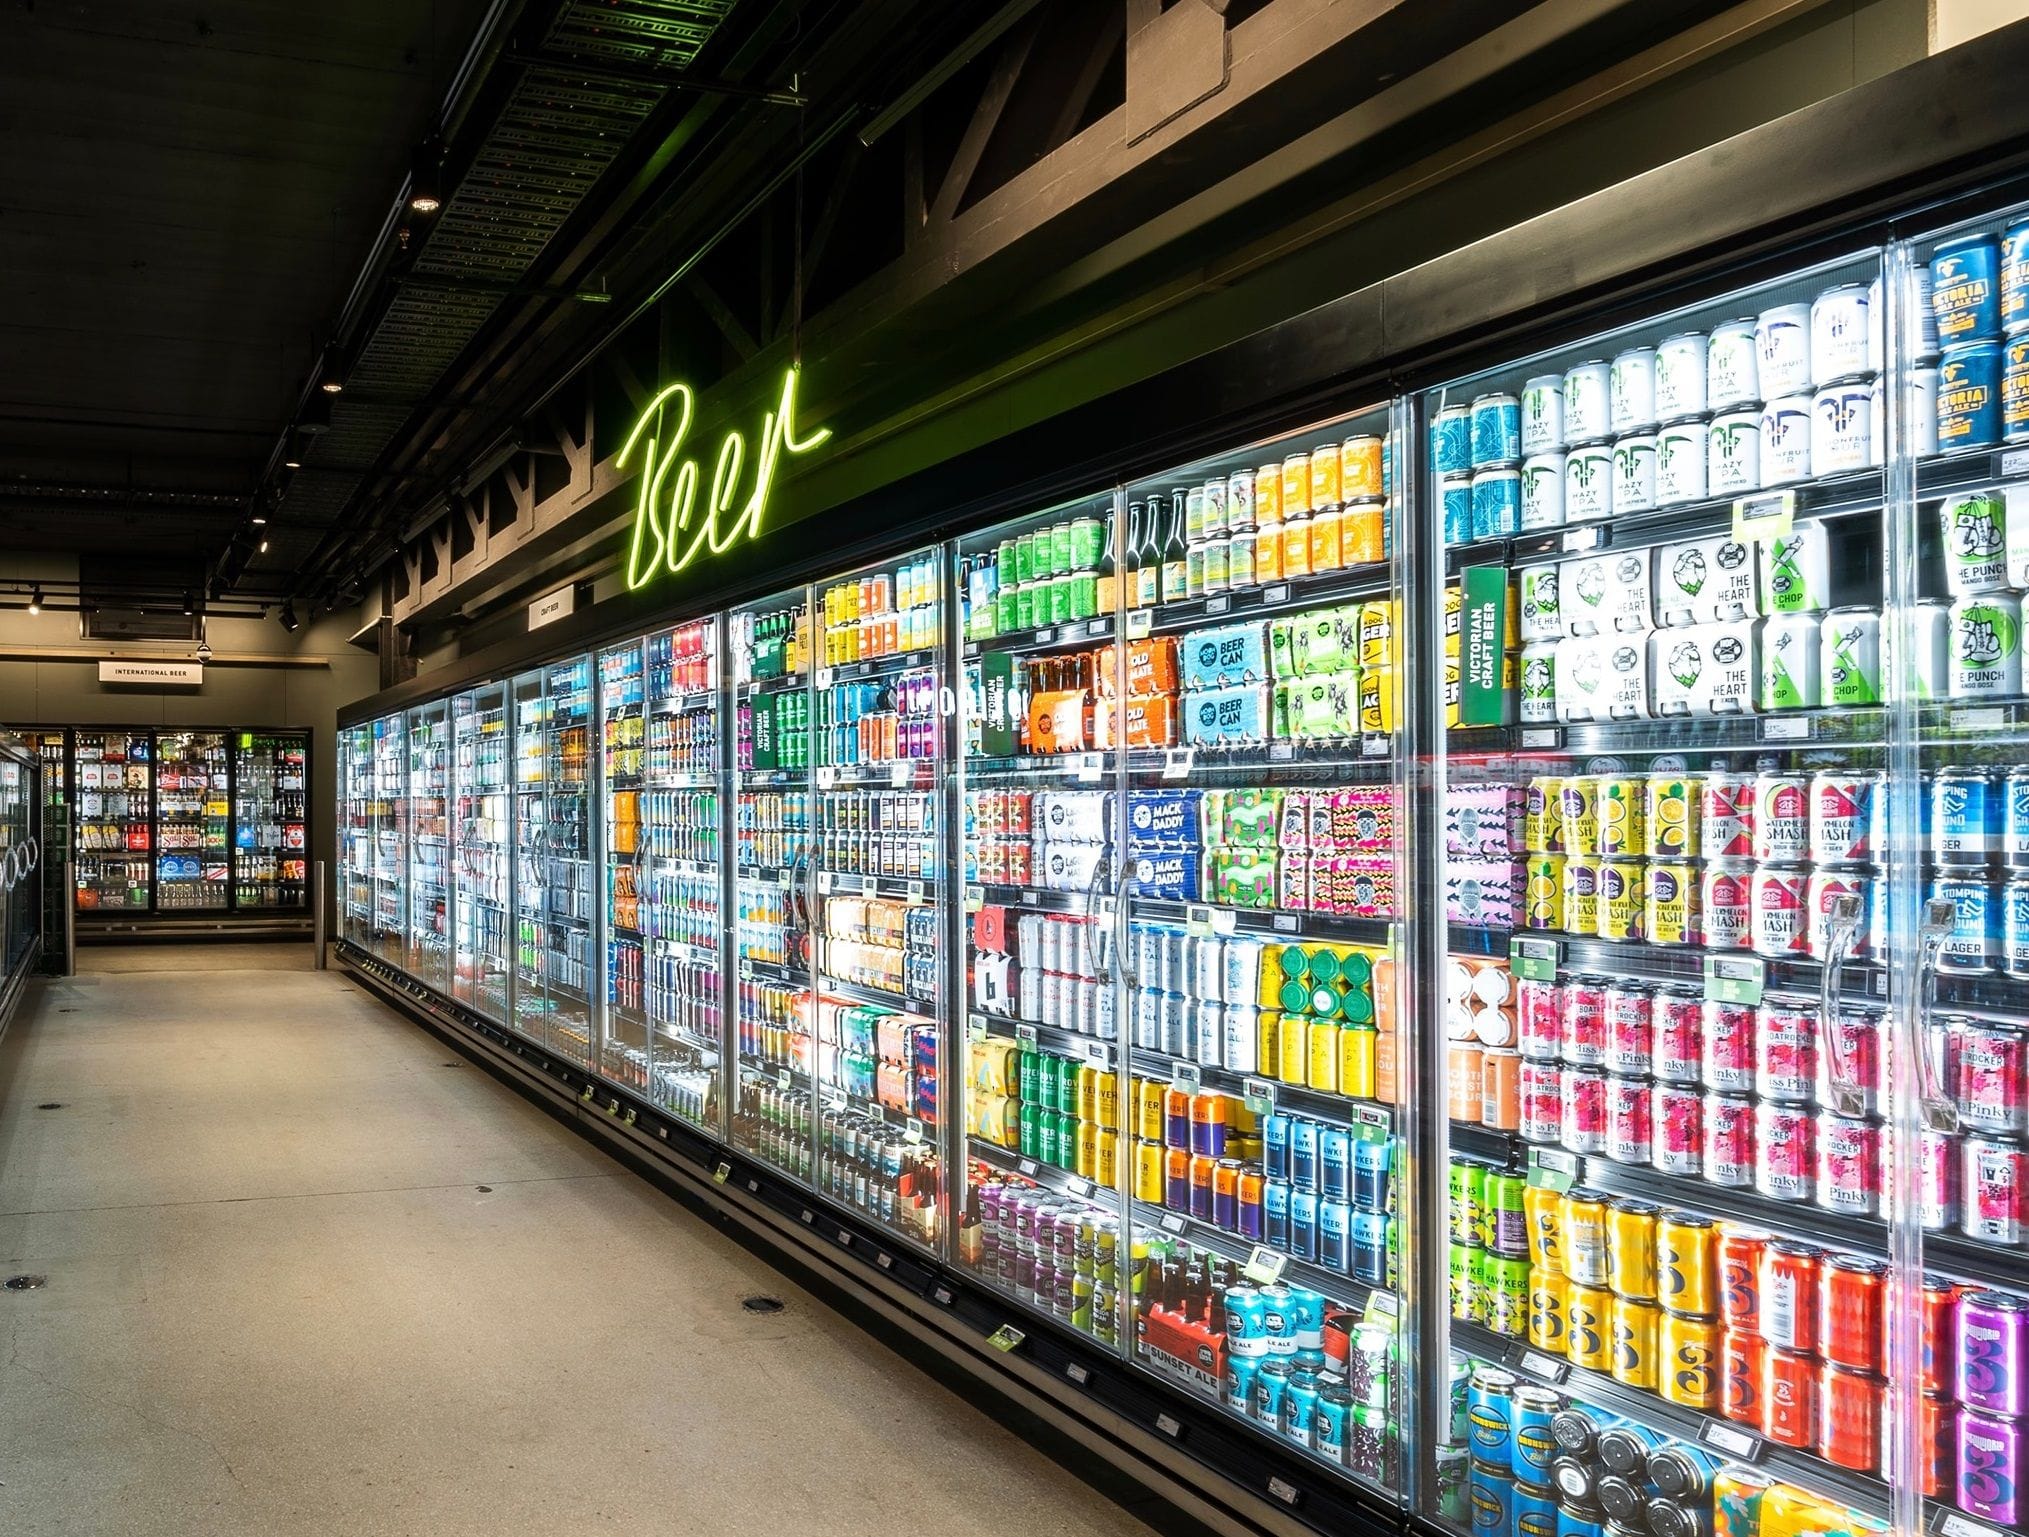 Up to $2 billion in shareholder returns up for grabs with Woolies liquor spin-off in sight